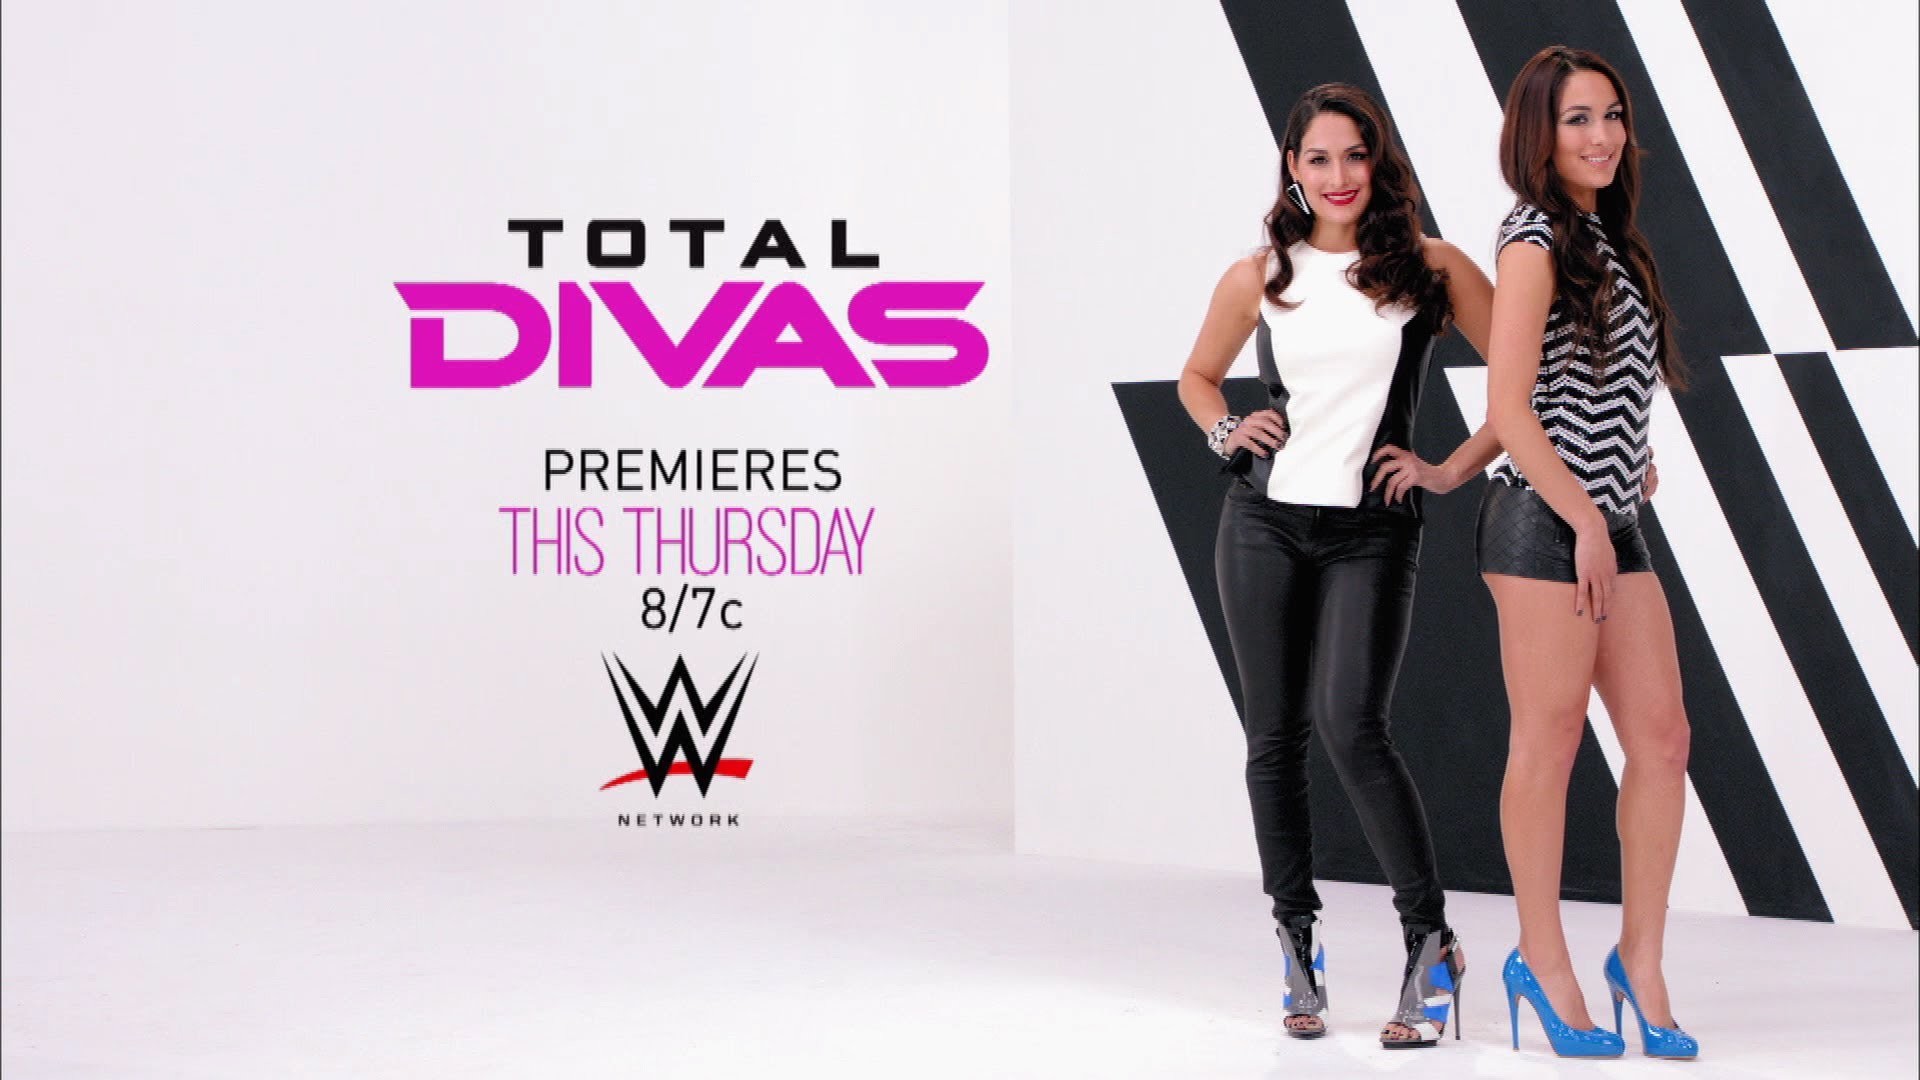 1920x1080 "Total Divas" comes to WWE Network